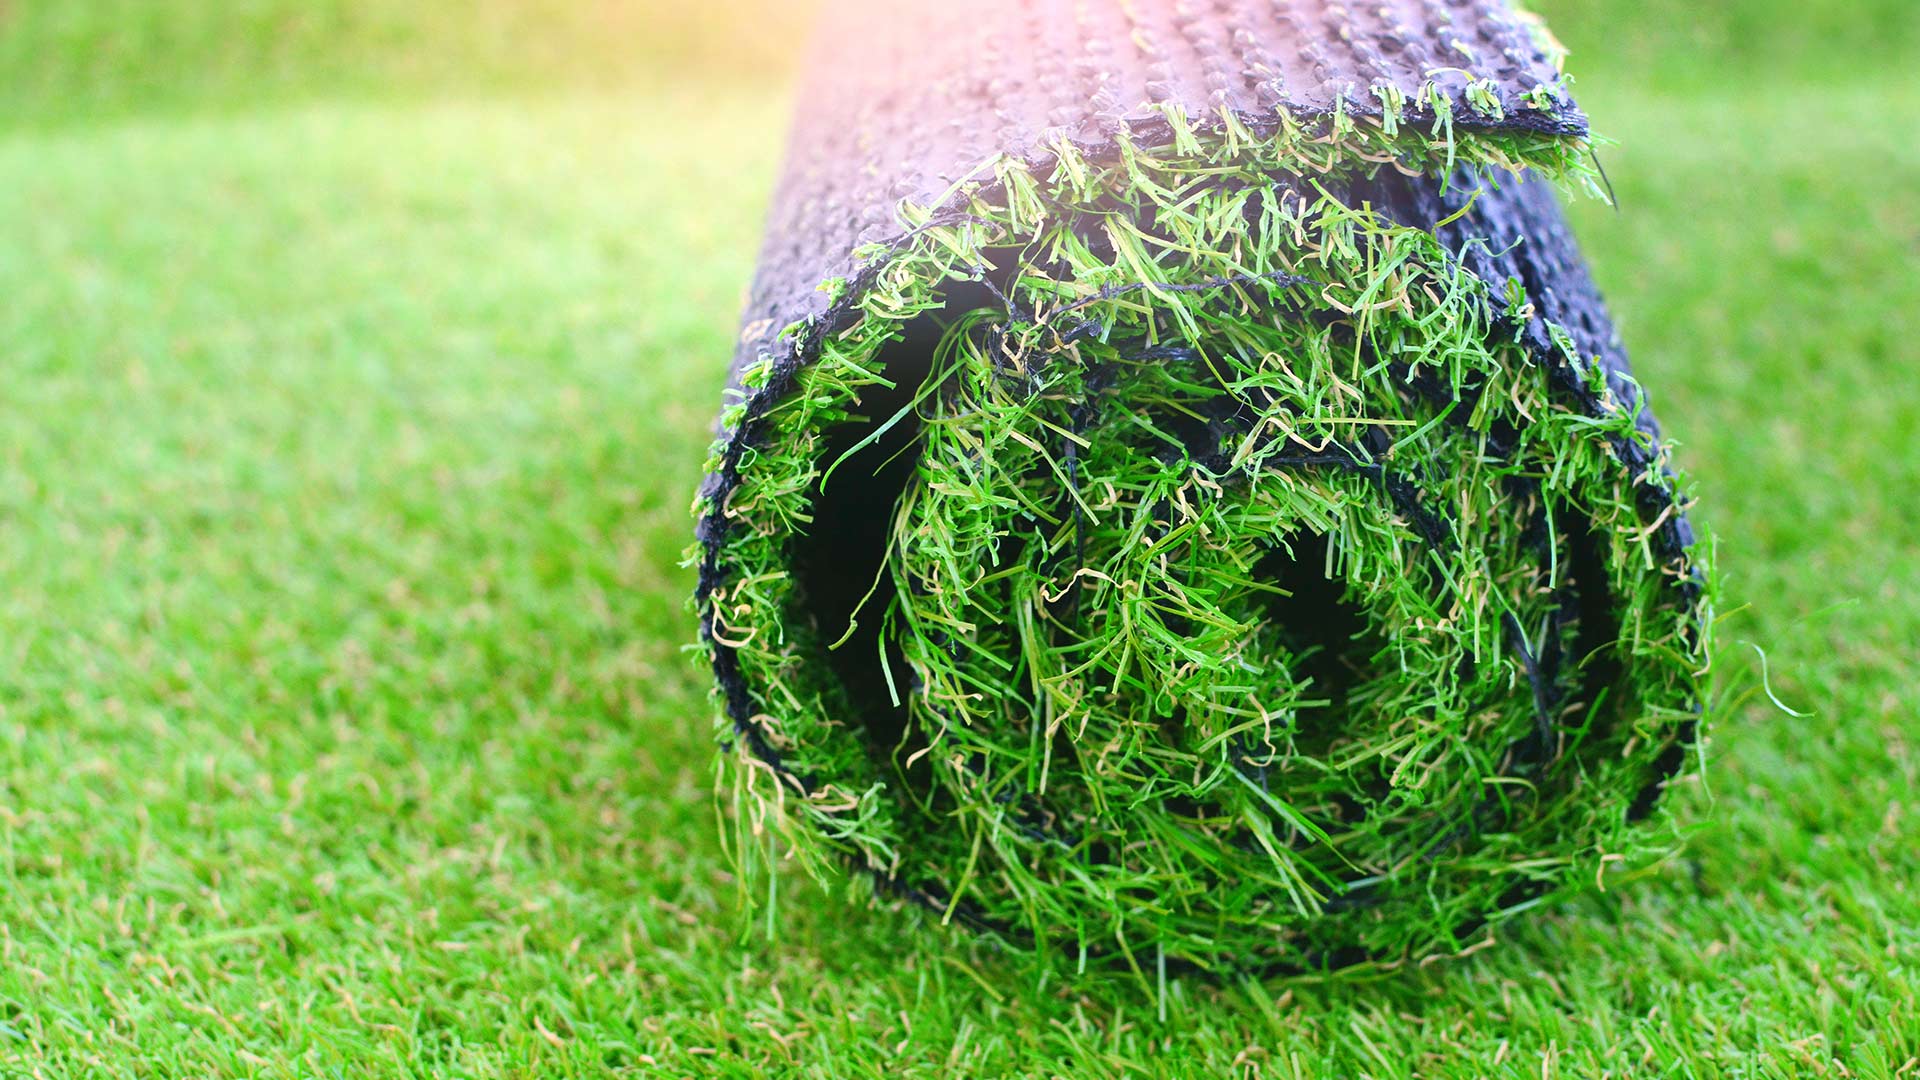 Rolled up artificial turf in Glendale, AZ.